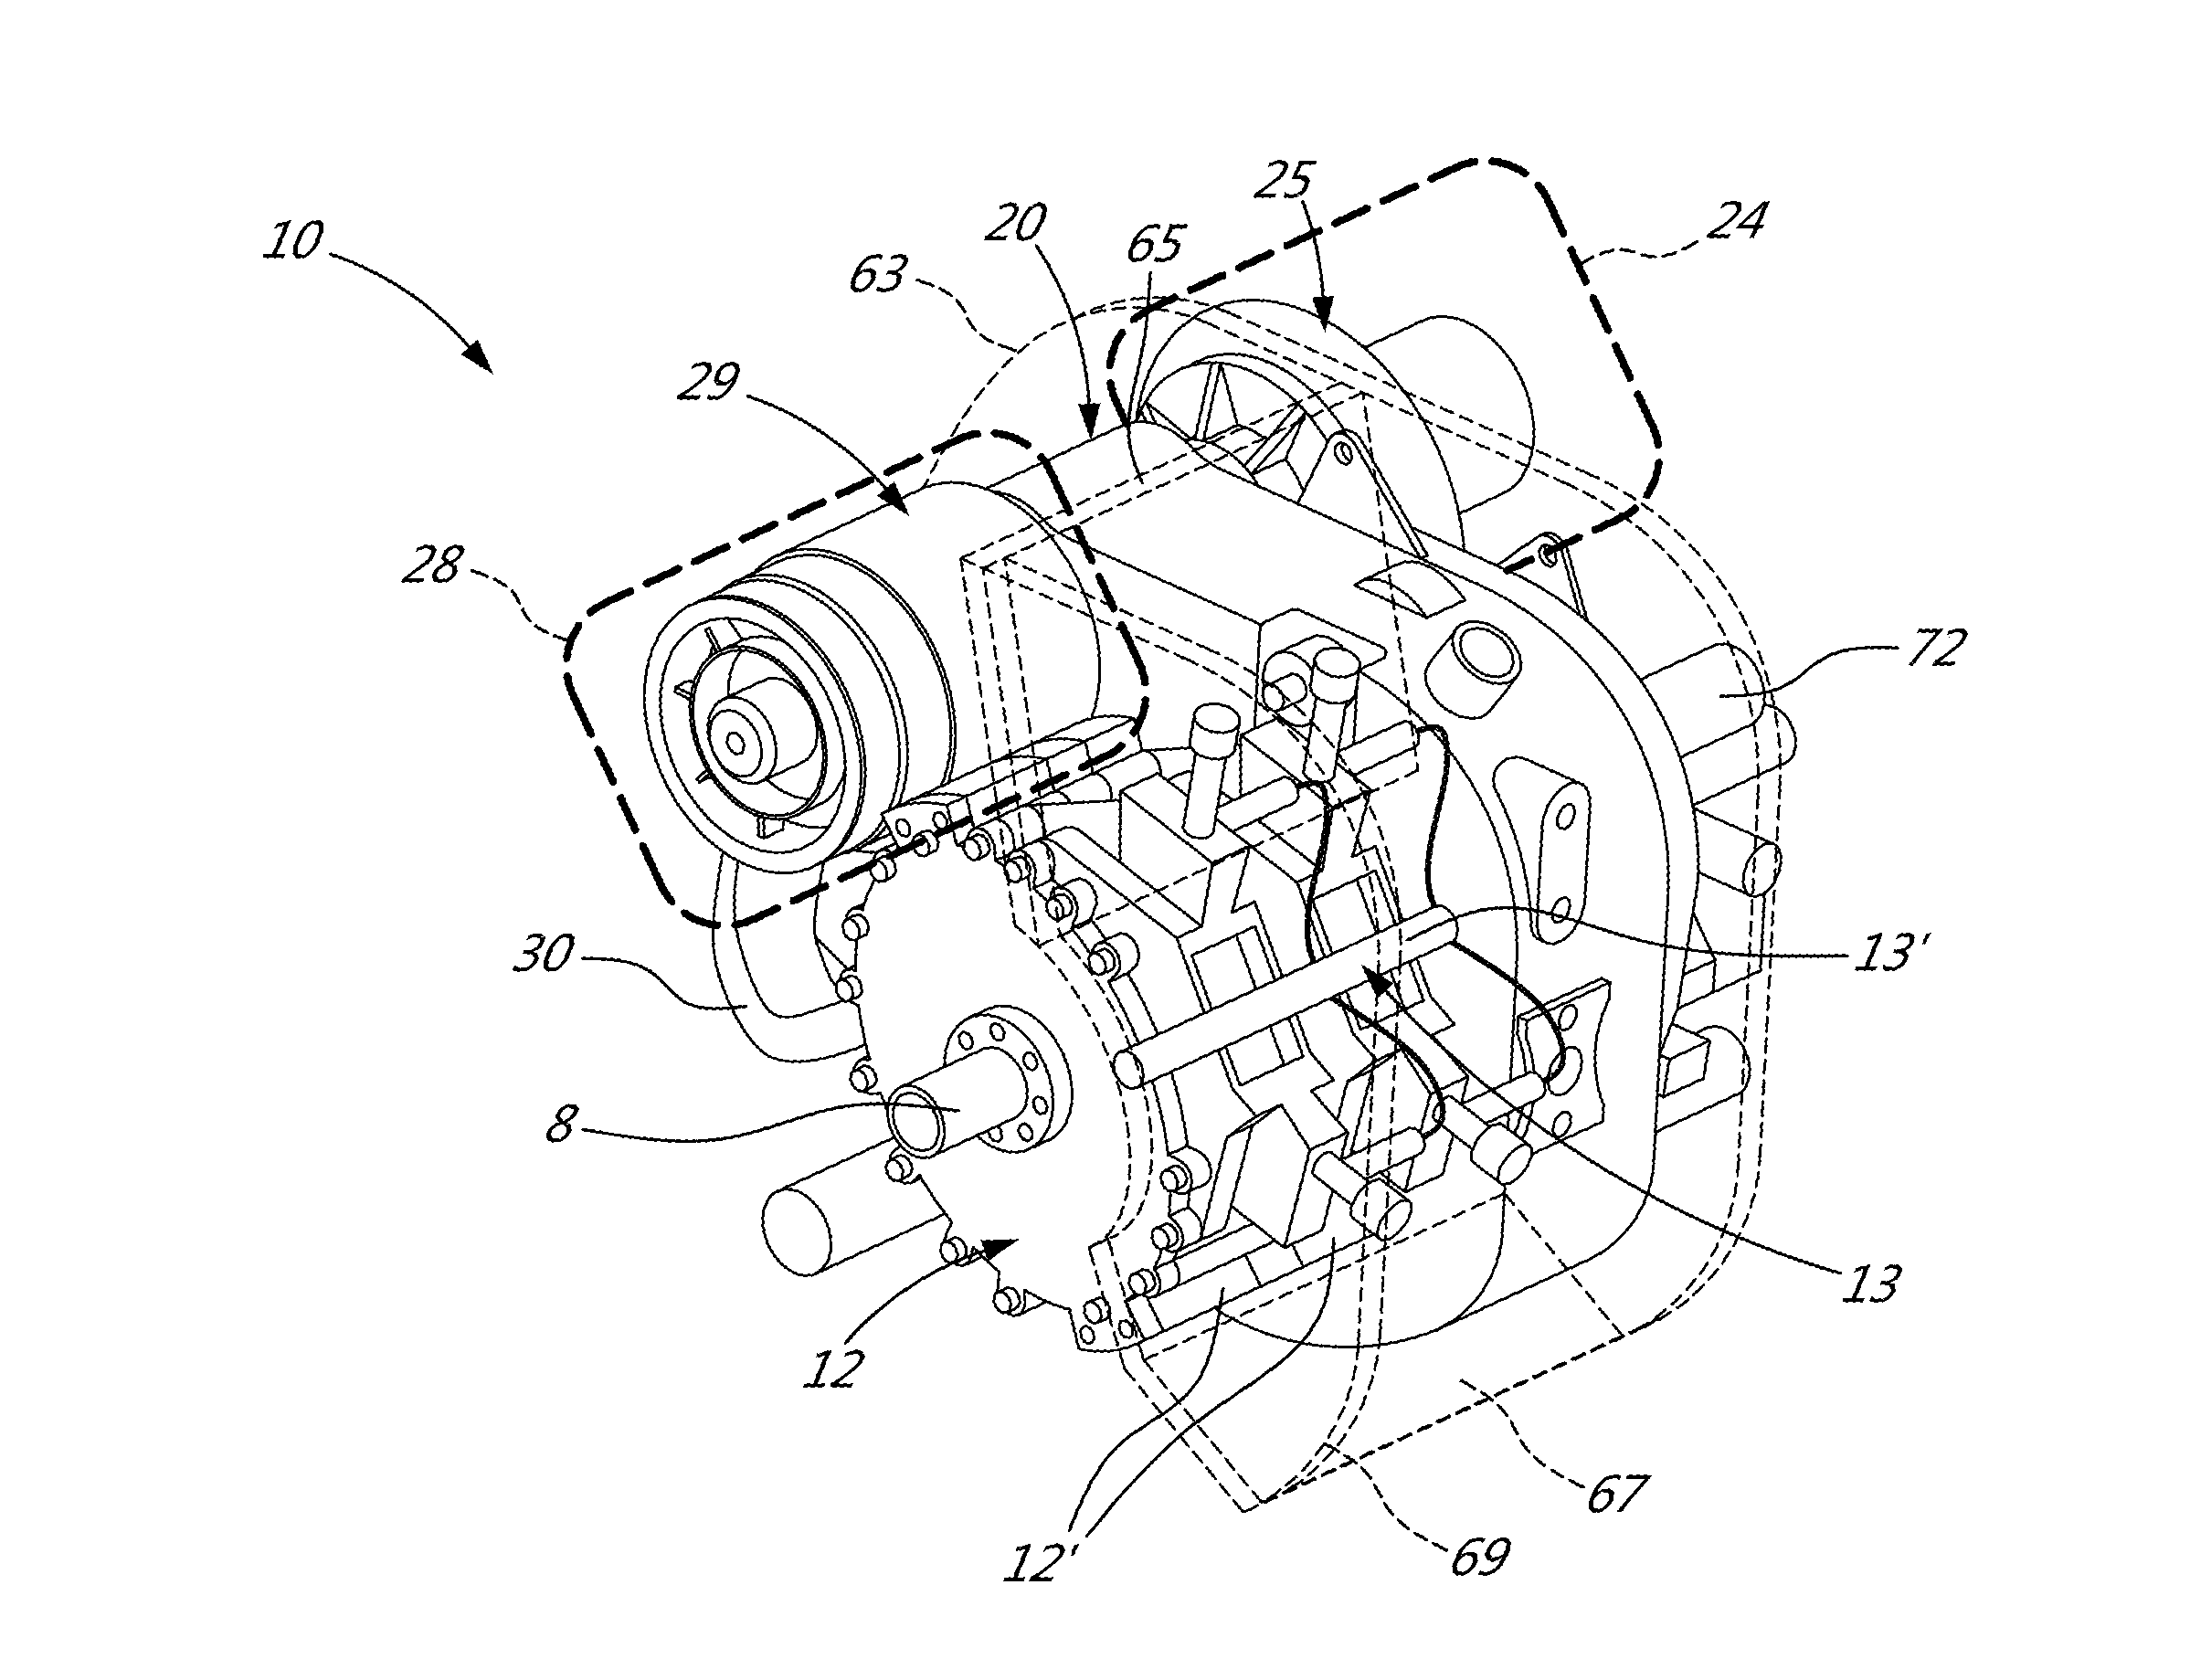 Compound engine assembly with mount cage